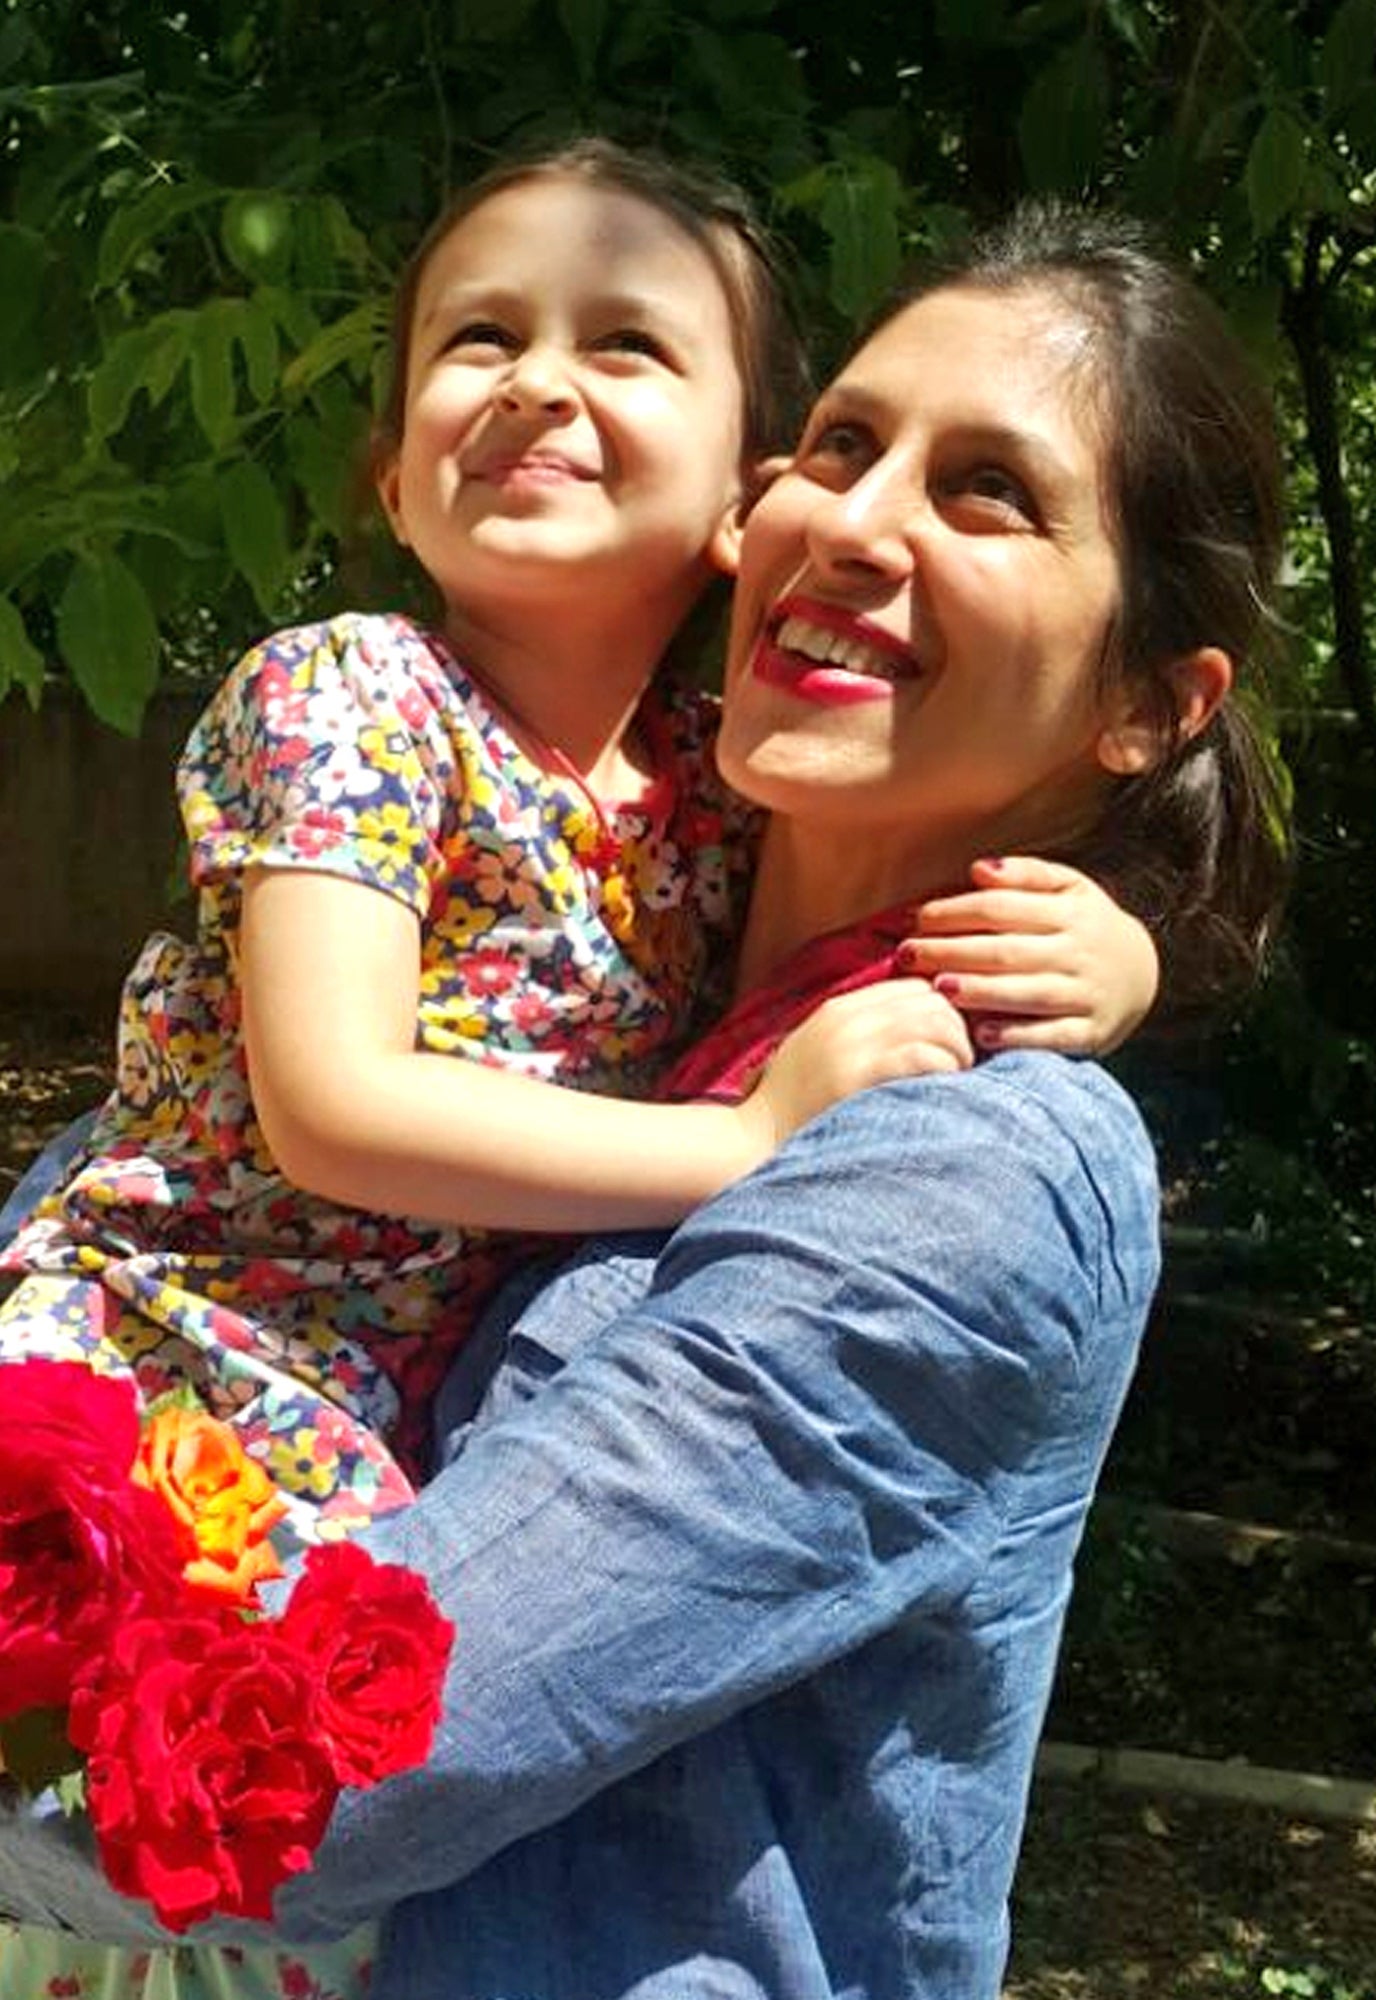 Zaghari-Ratcliffe with her daughter Gabriella in 2018, while Gabriella was living with her grandparents in Tehran